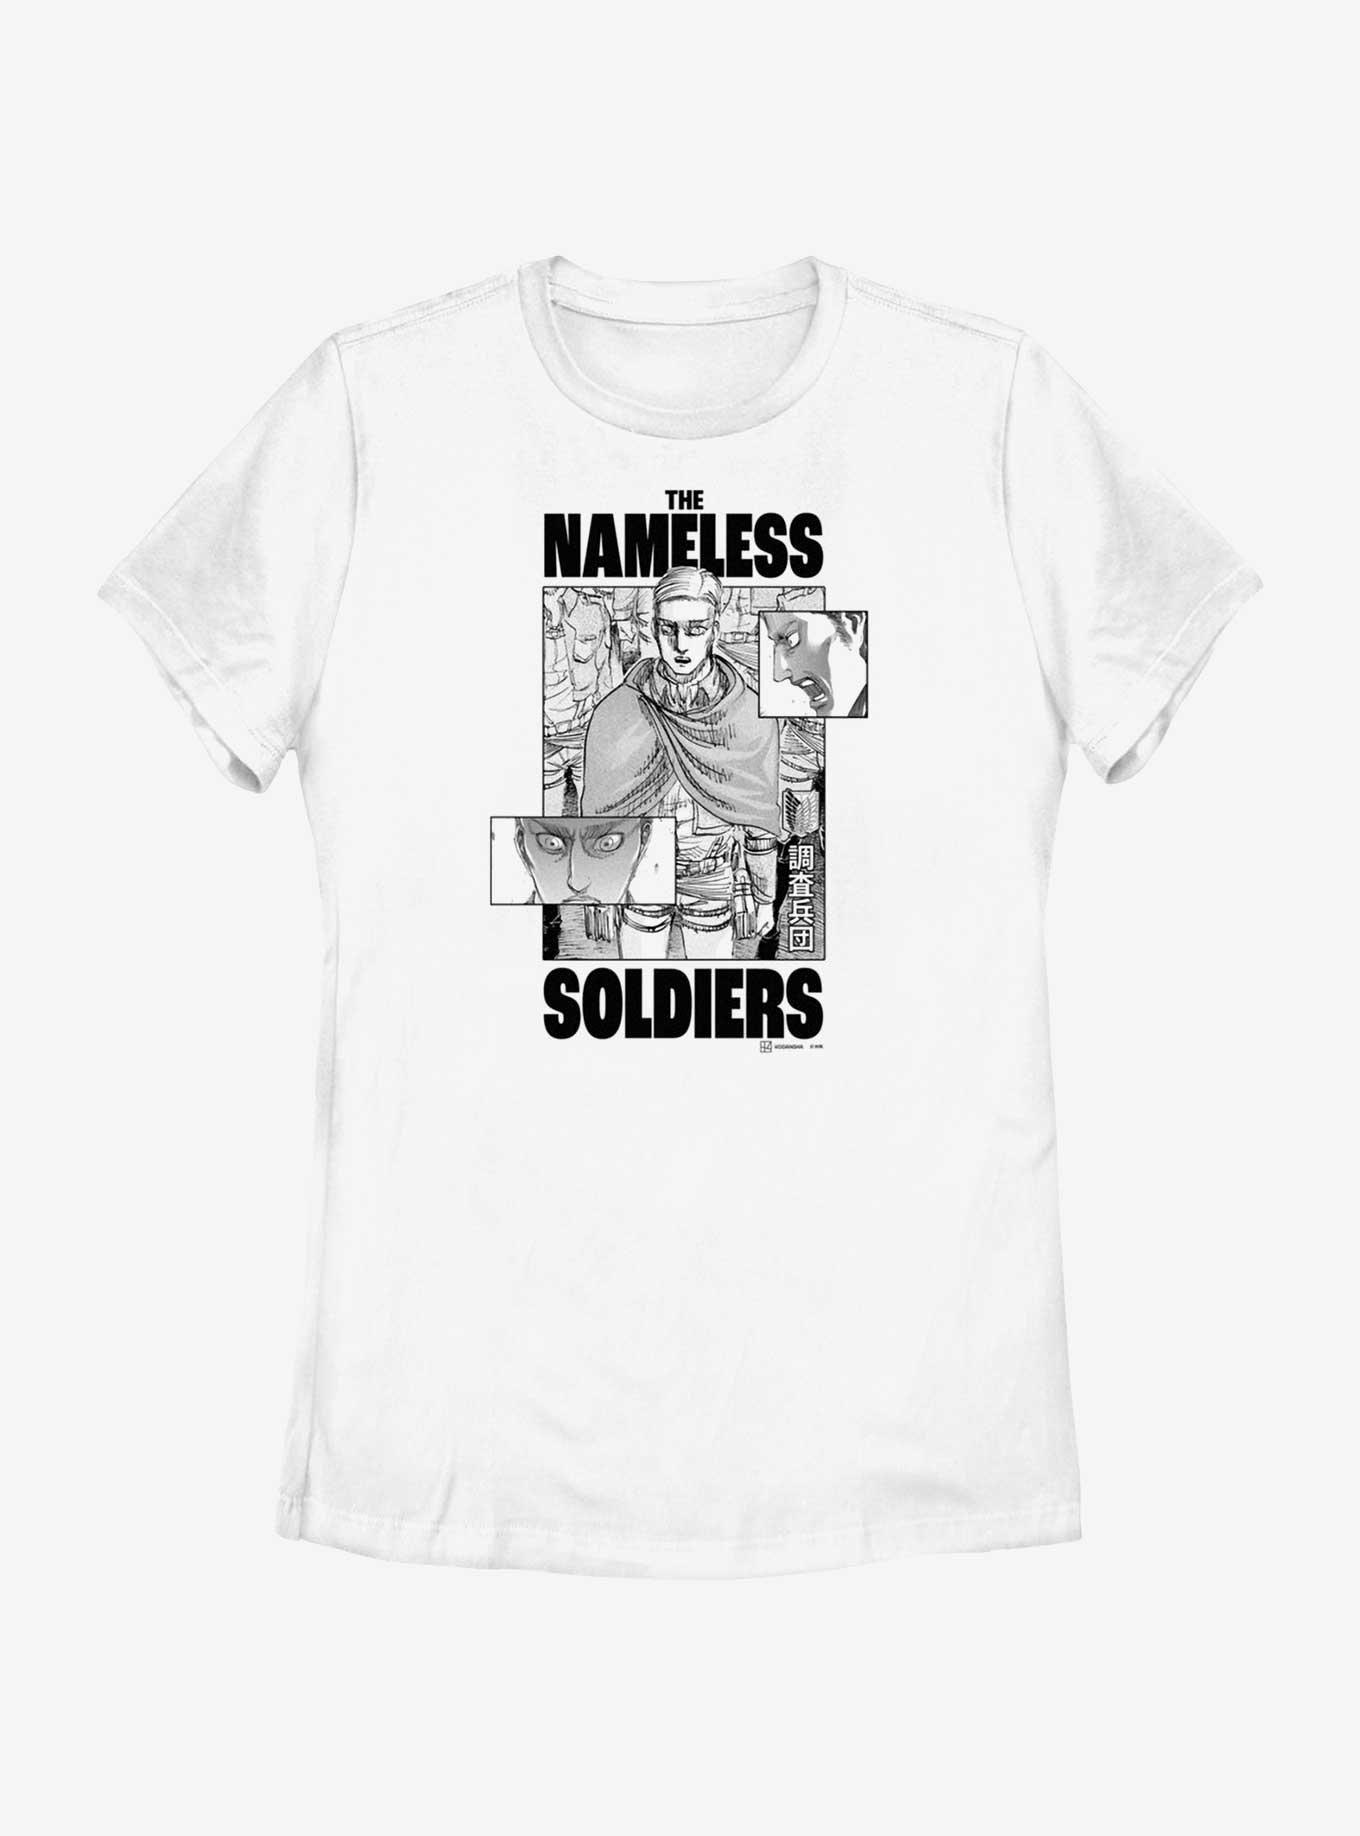 Attack on Titan The Nameless Soldiers Womens T-Shirt, WHITE, hi-res